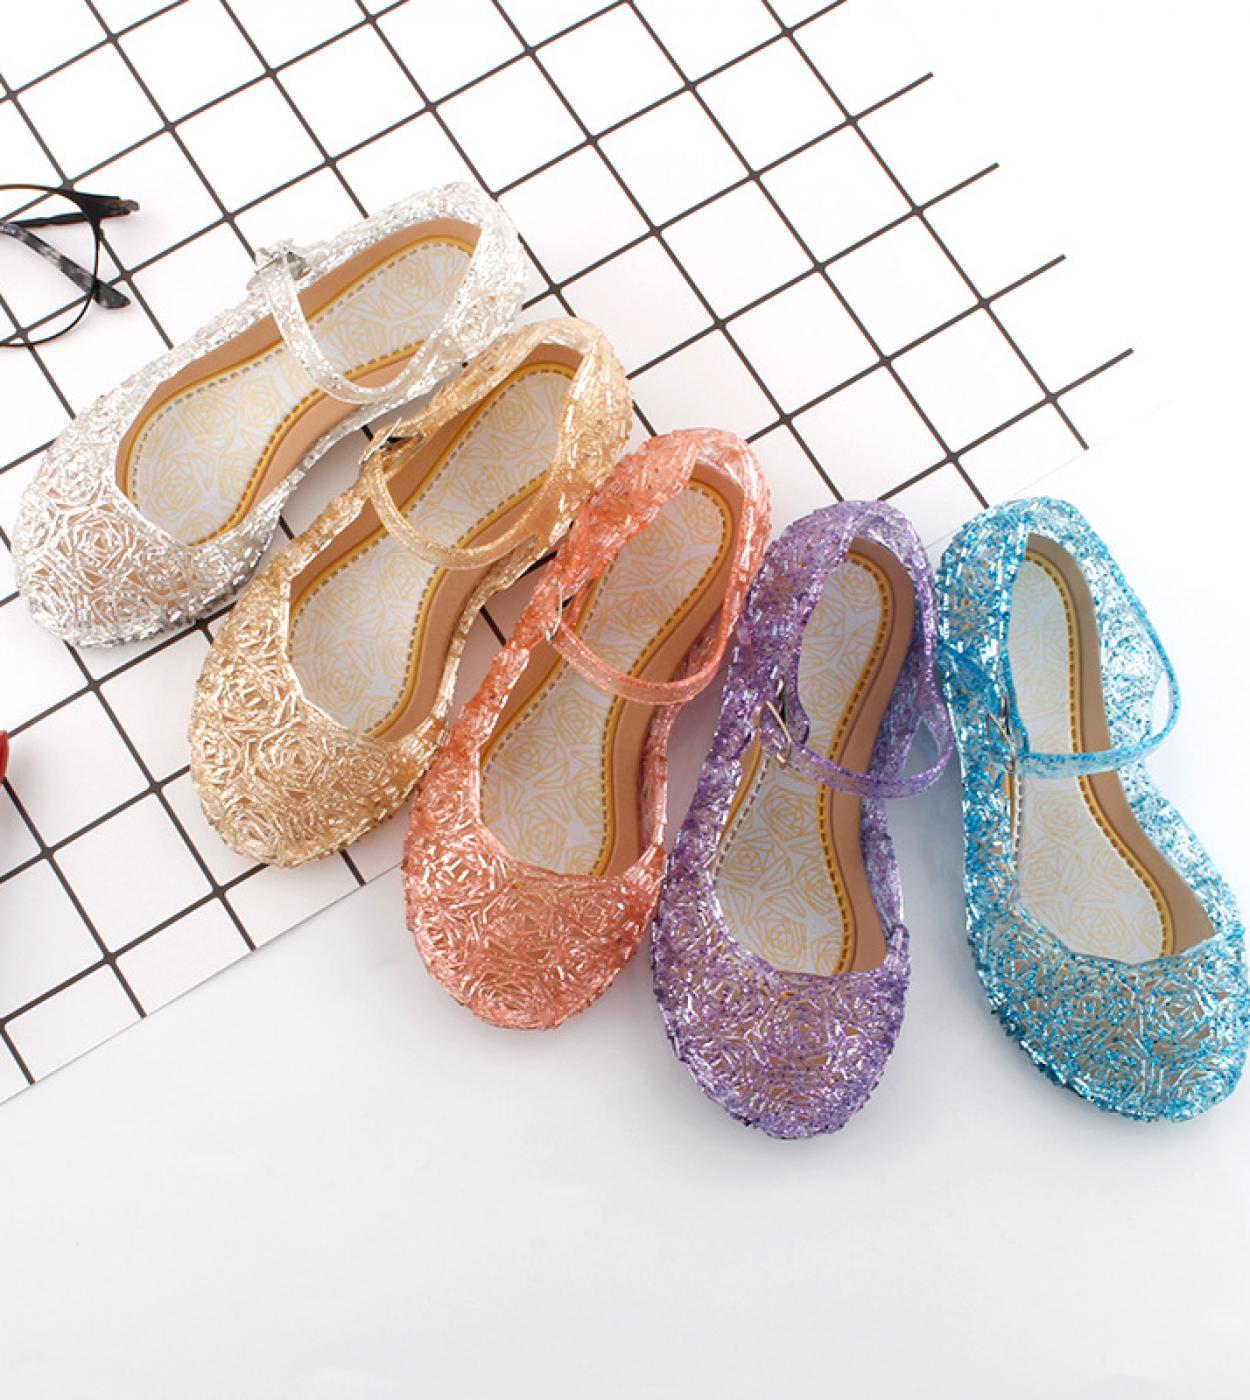 Baby Girls Kids Summer Crystal Sandals Princess Jelly Highheeled Shoes Princess Cosplay Party Dance Shoes  Sandals